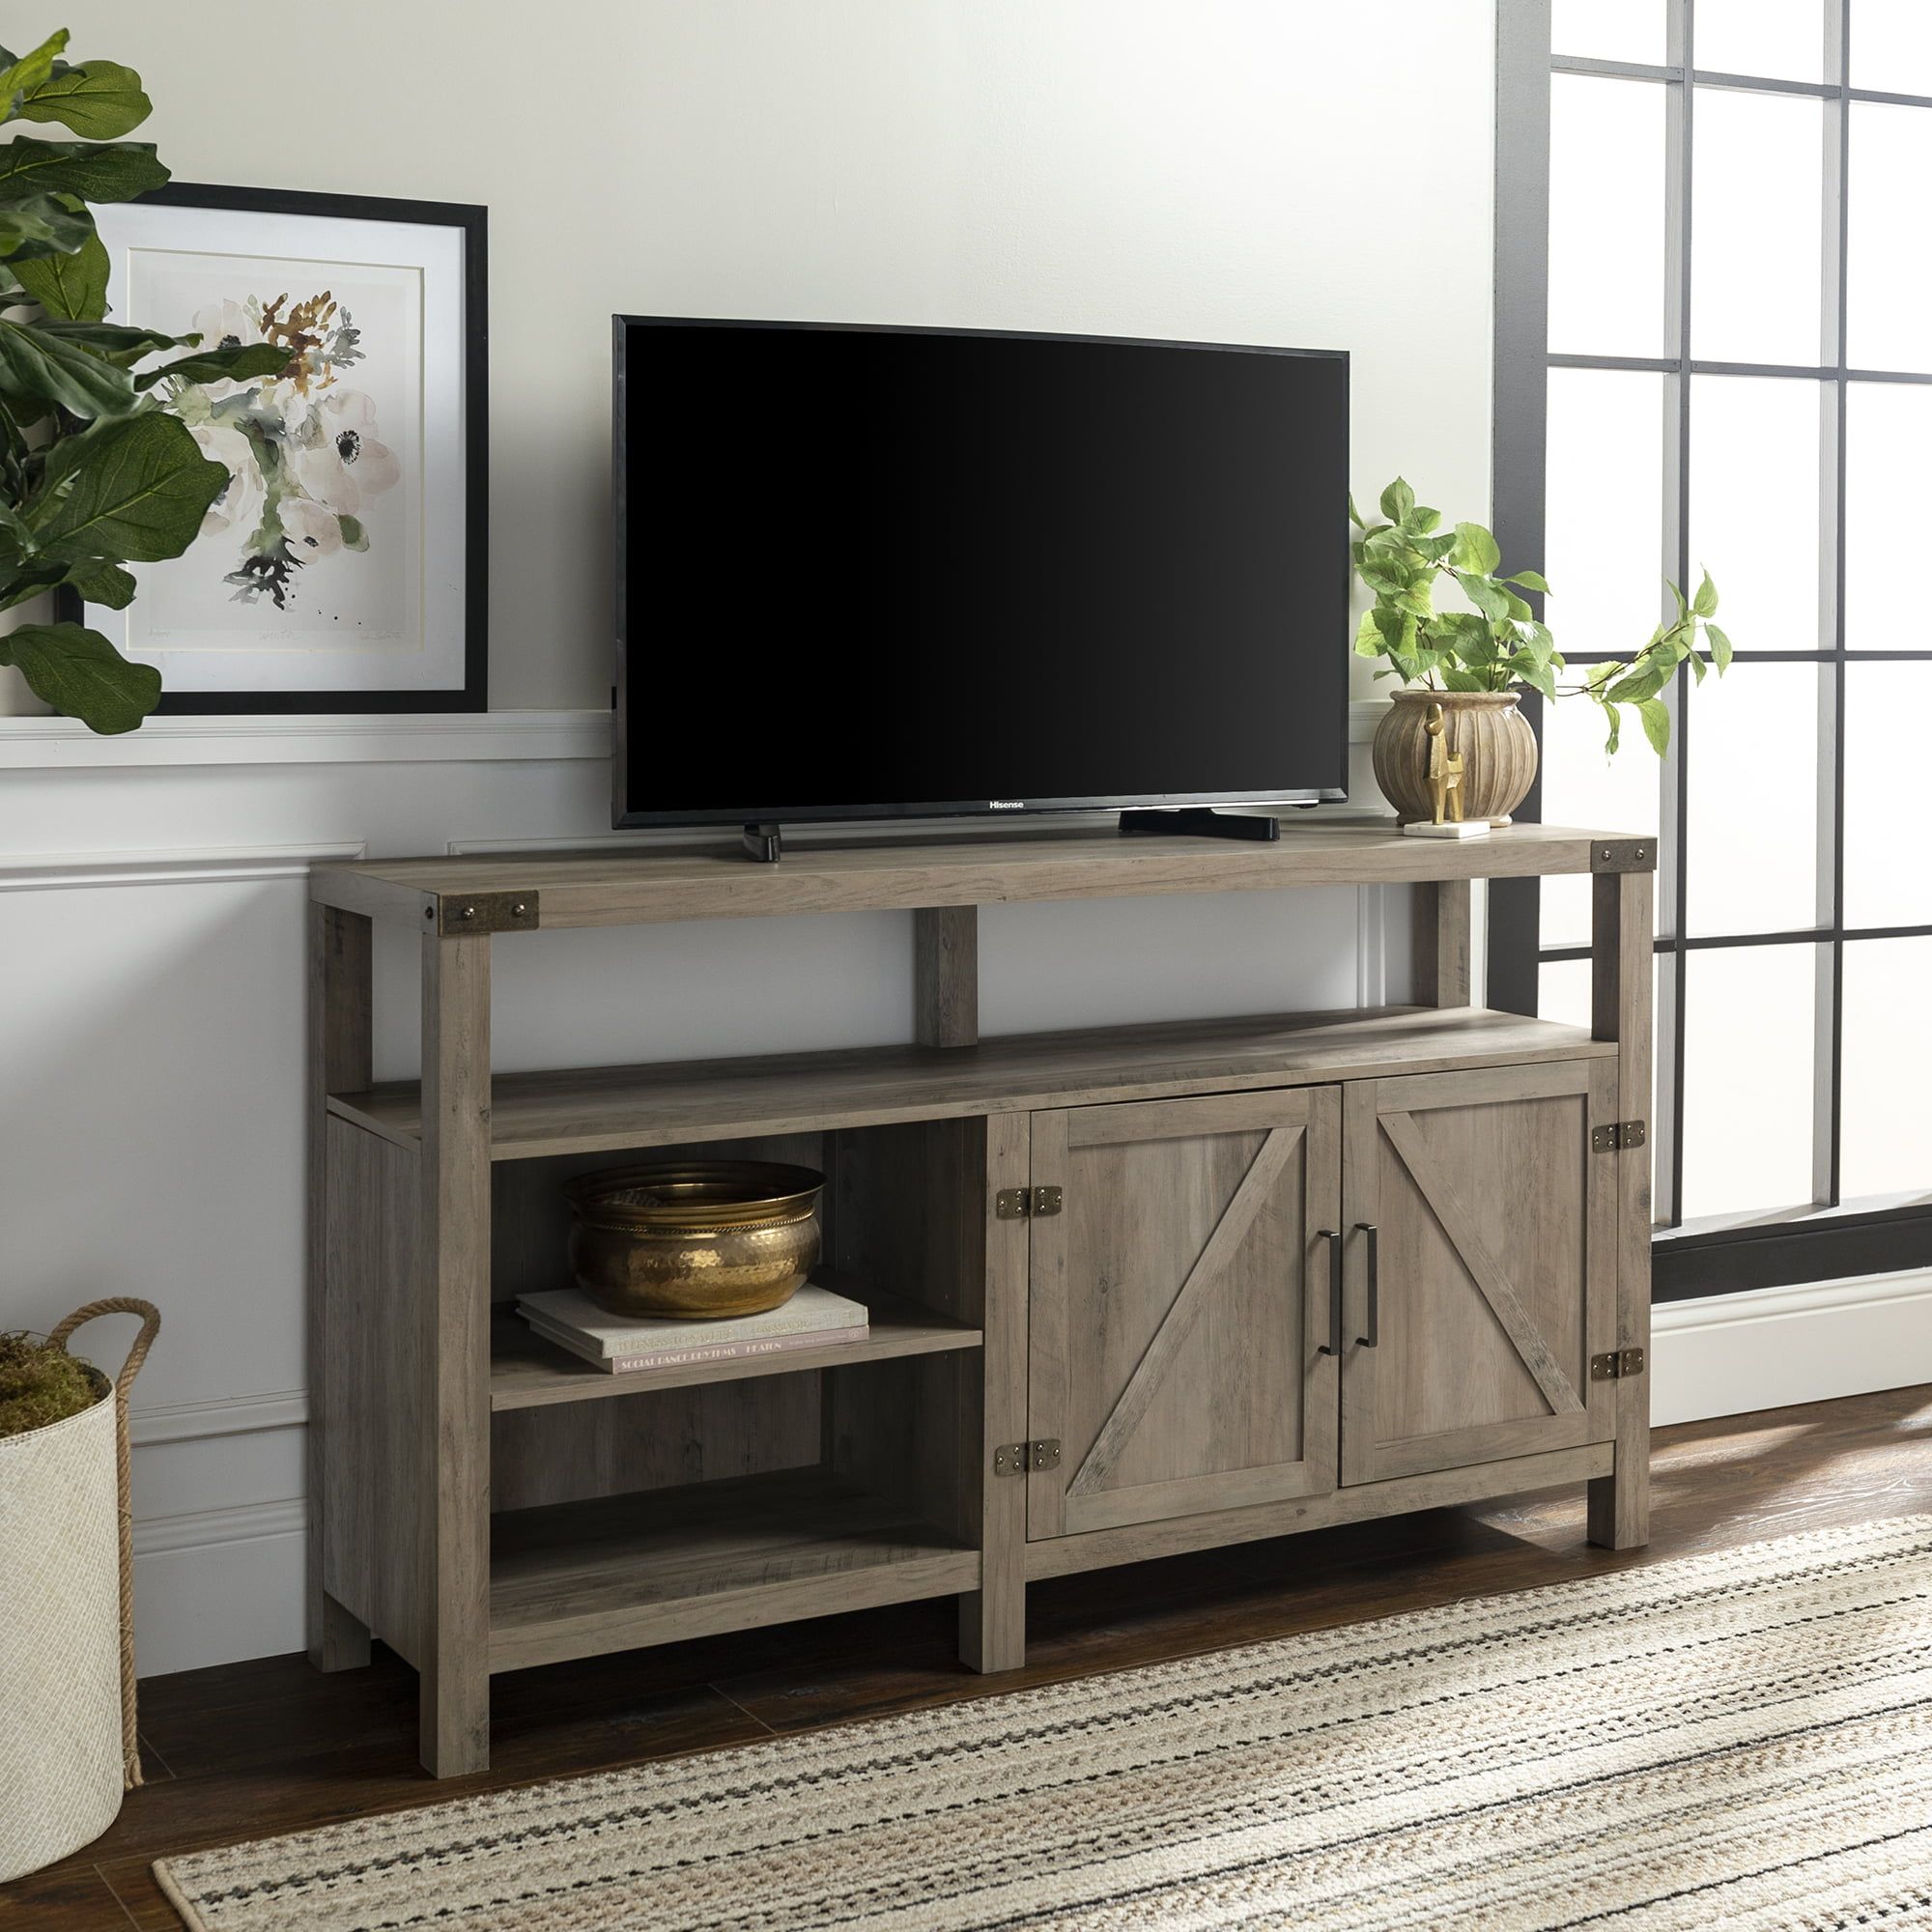 Manor Park Modern Farmhouse Tall Barn Door Tv Stand For Tv's Up To 64 In Modern Farmhouse Rustic Tv Stands (Gallery 10 of 20)